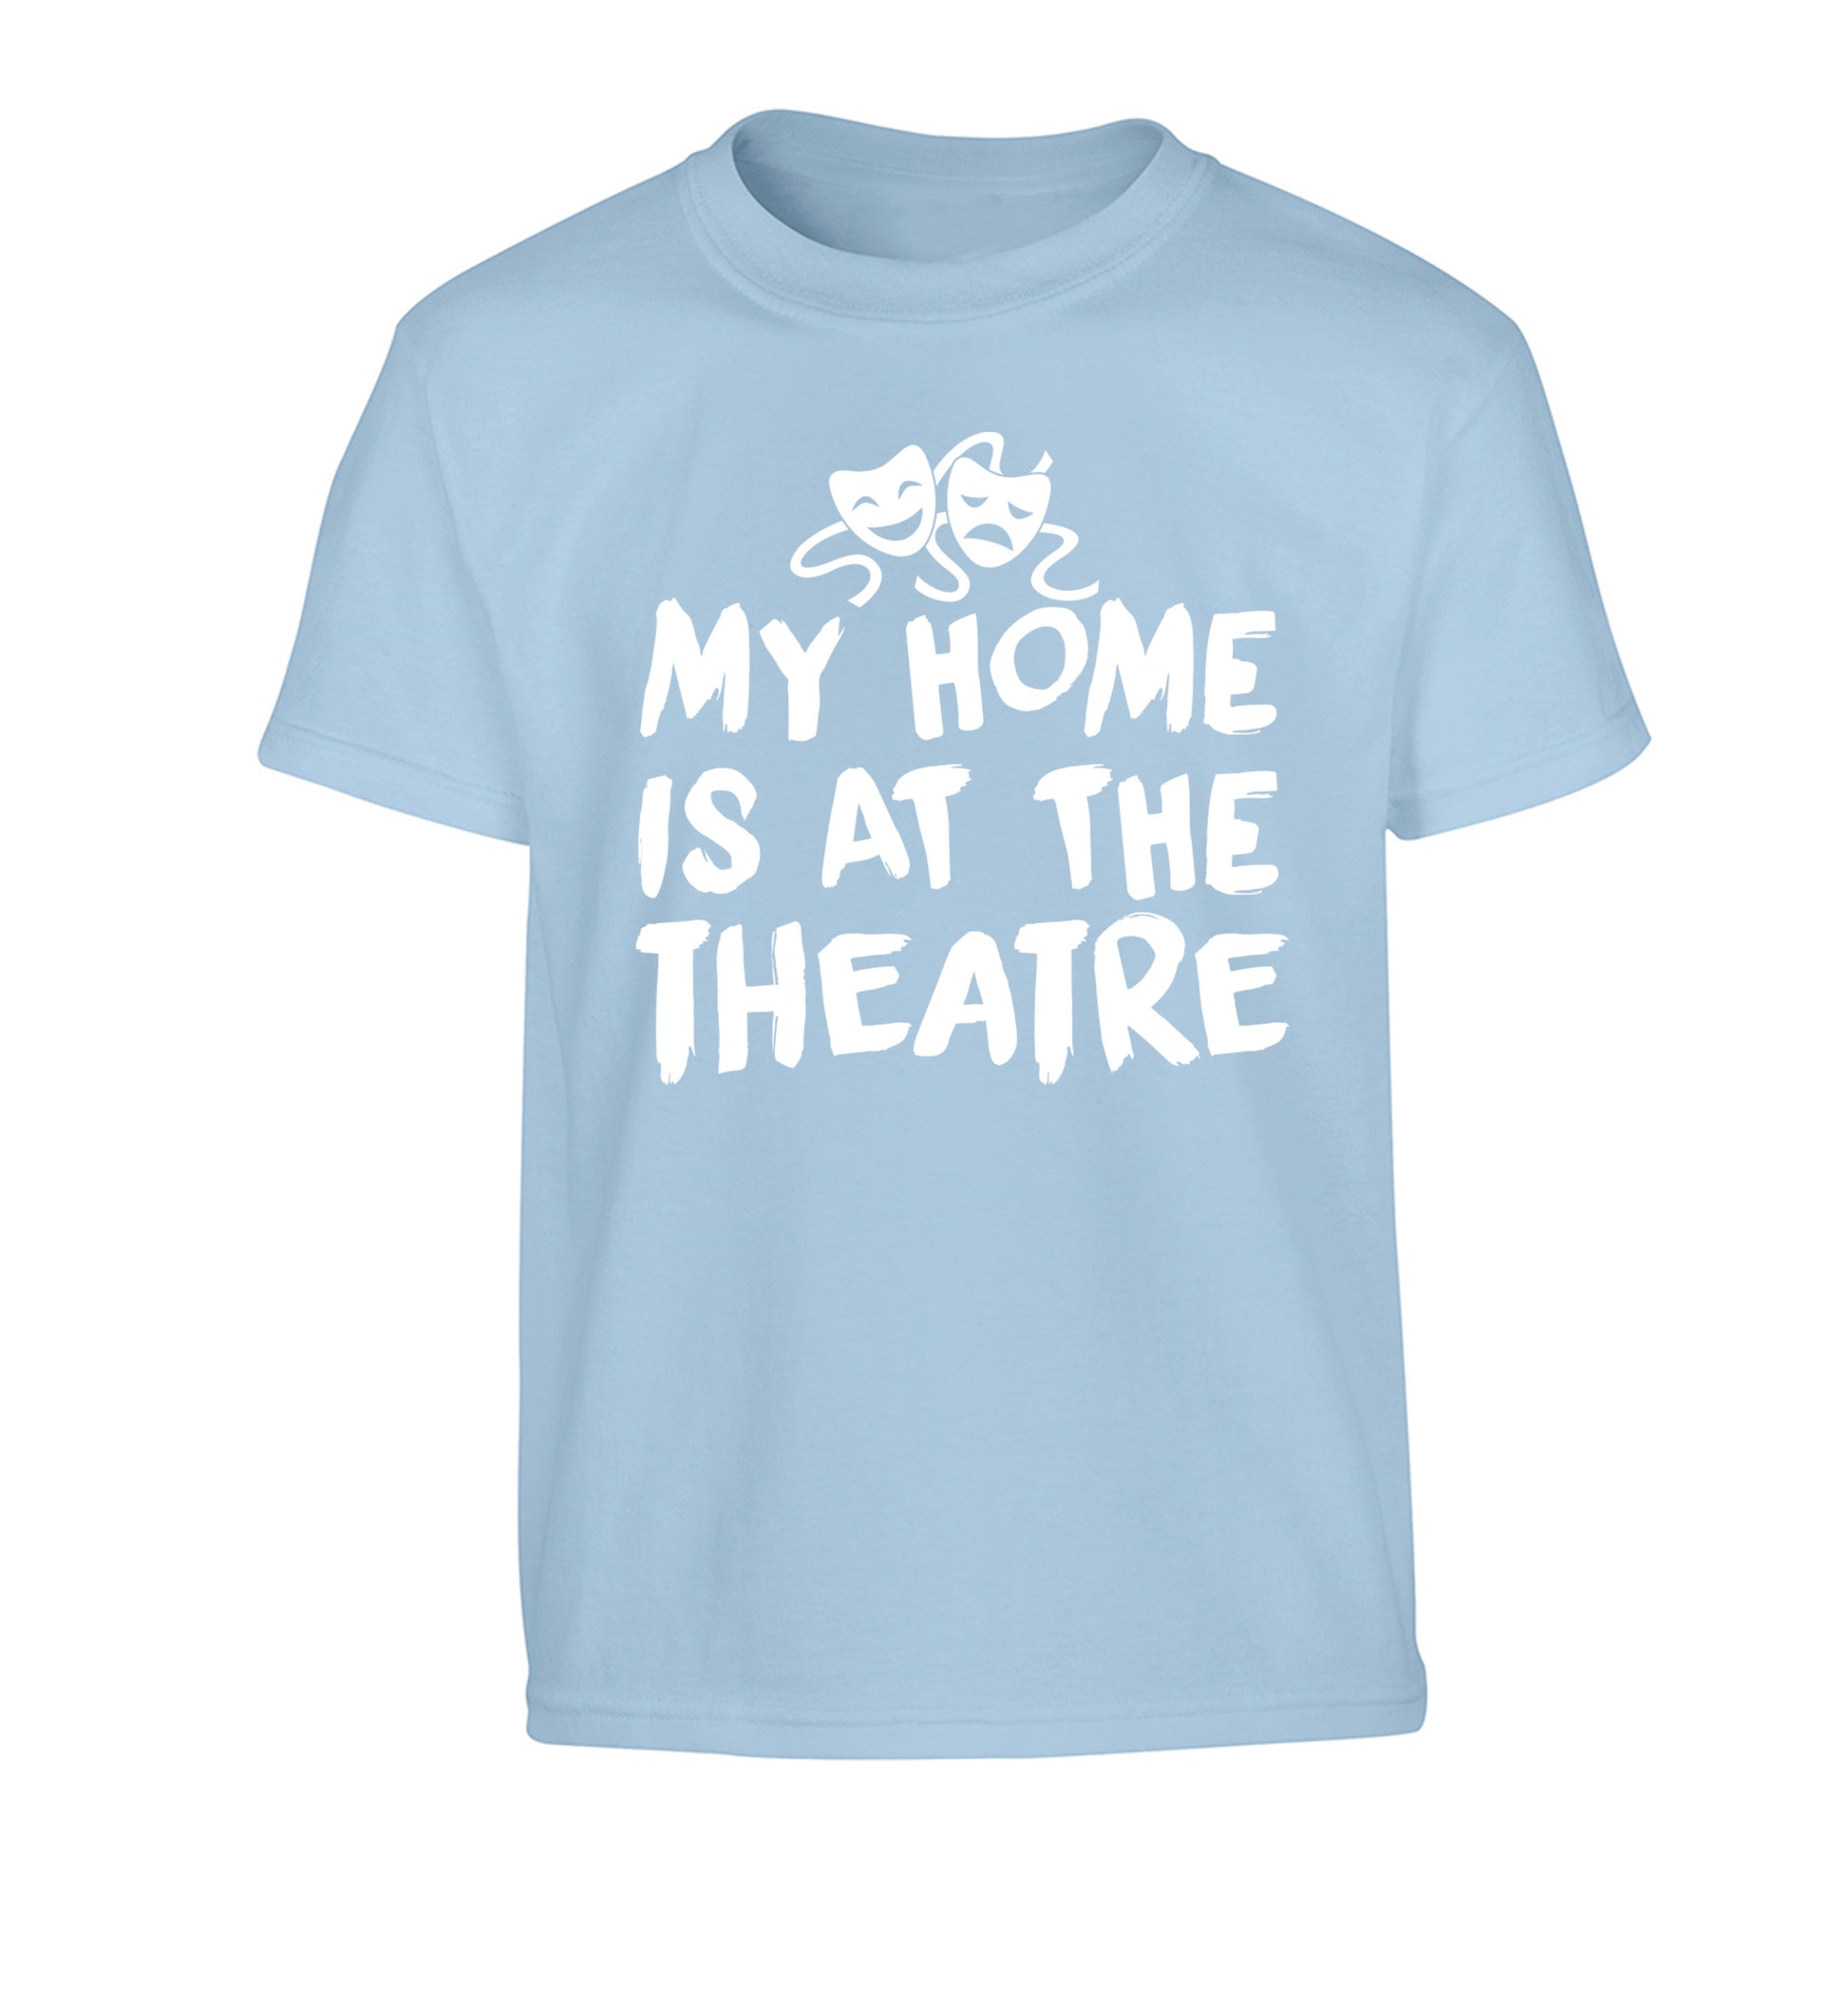 My home is at the theatre Children's light blue Tshirt 12-14 Years